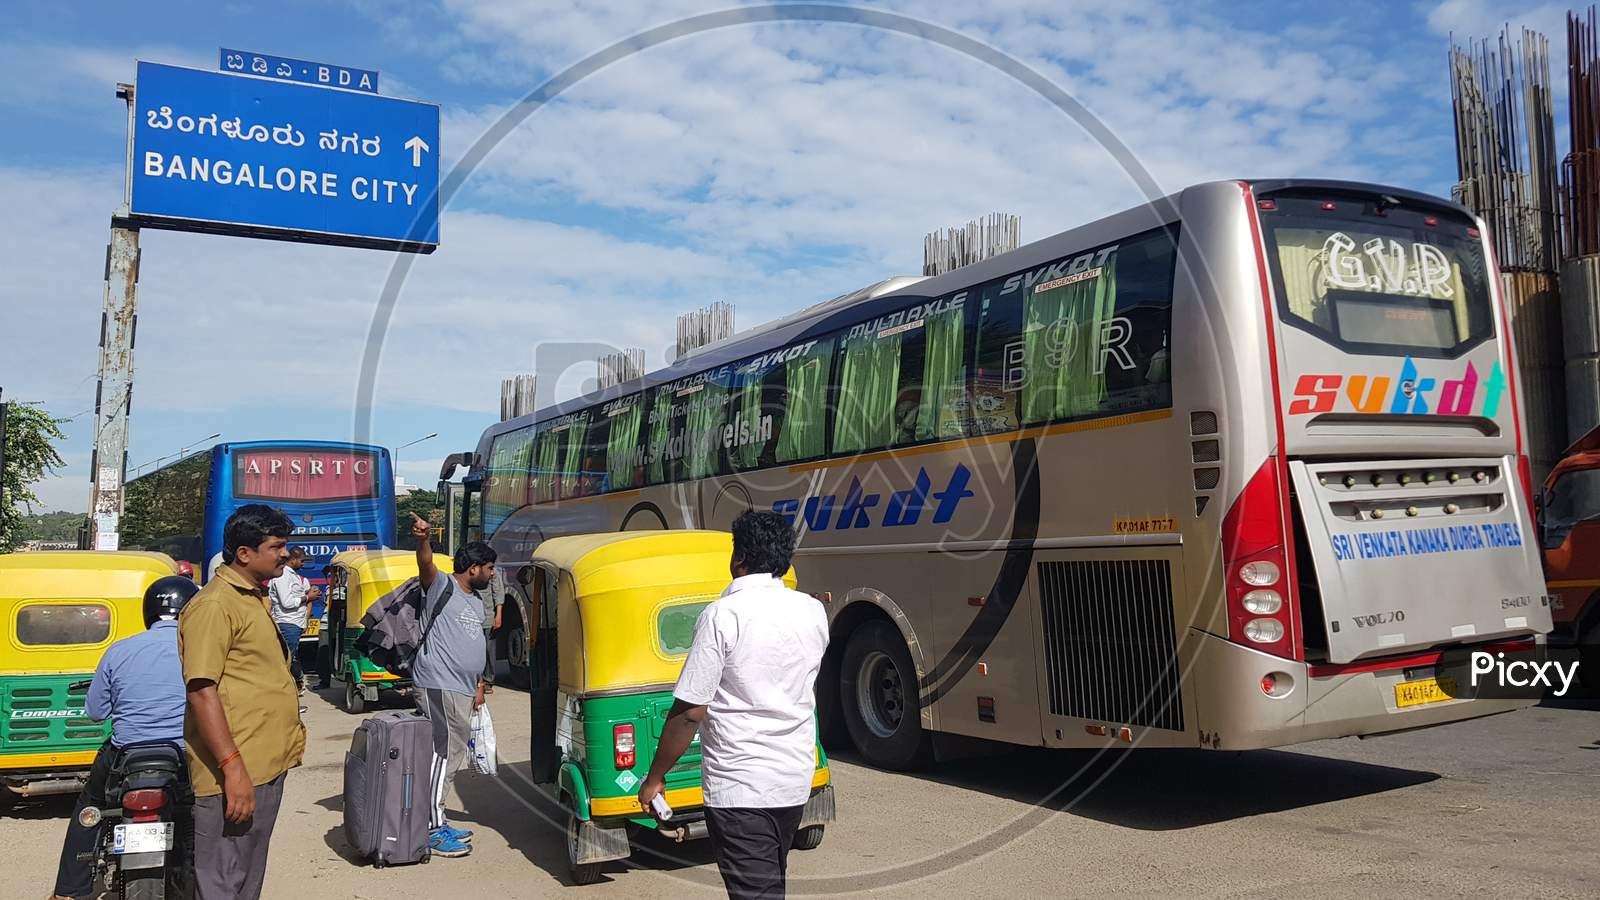 Bengaluru, Karnataka / India - August 08 2019: People alighting from an interstate bus at a busy road with a hoarding that has 'Bangalore City' written in Kannada text